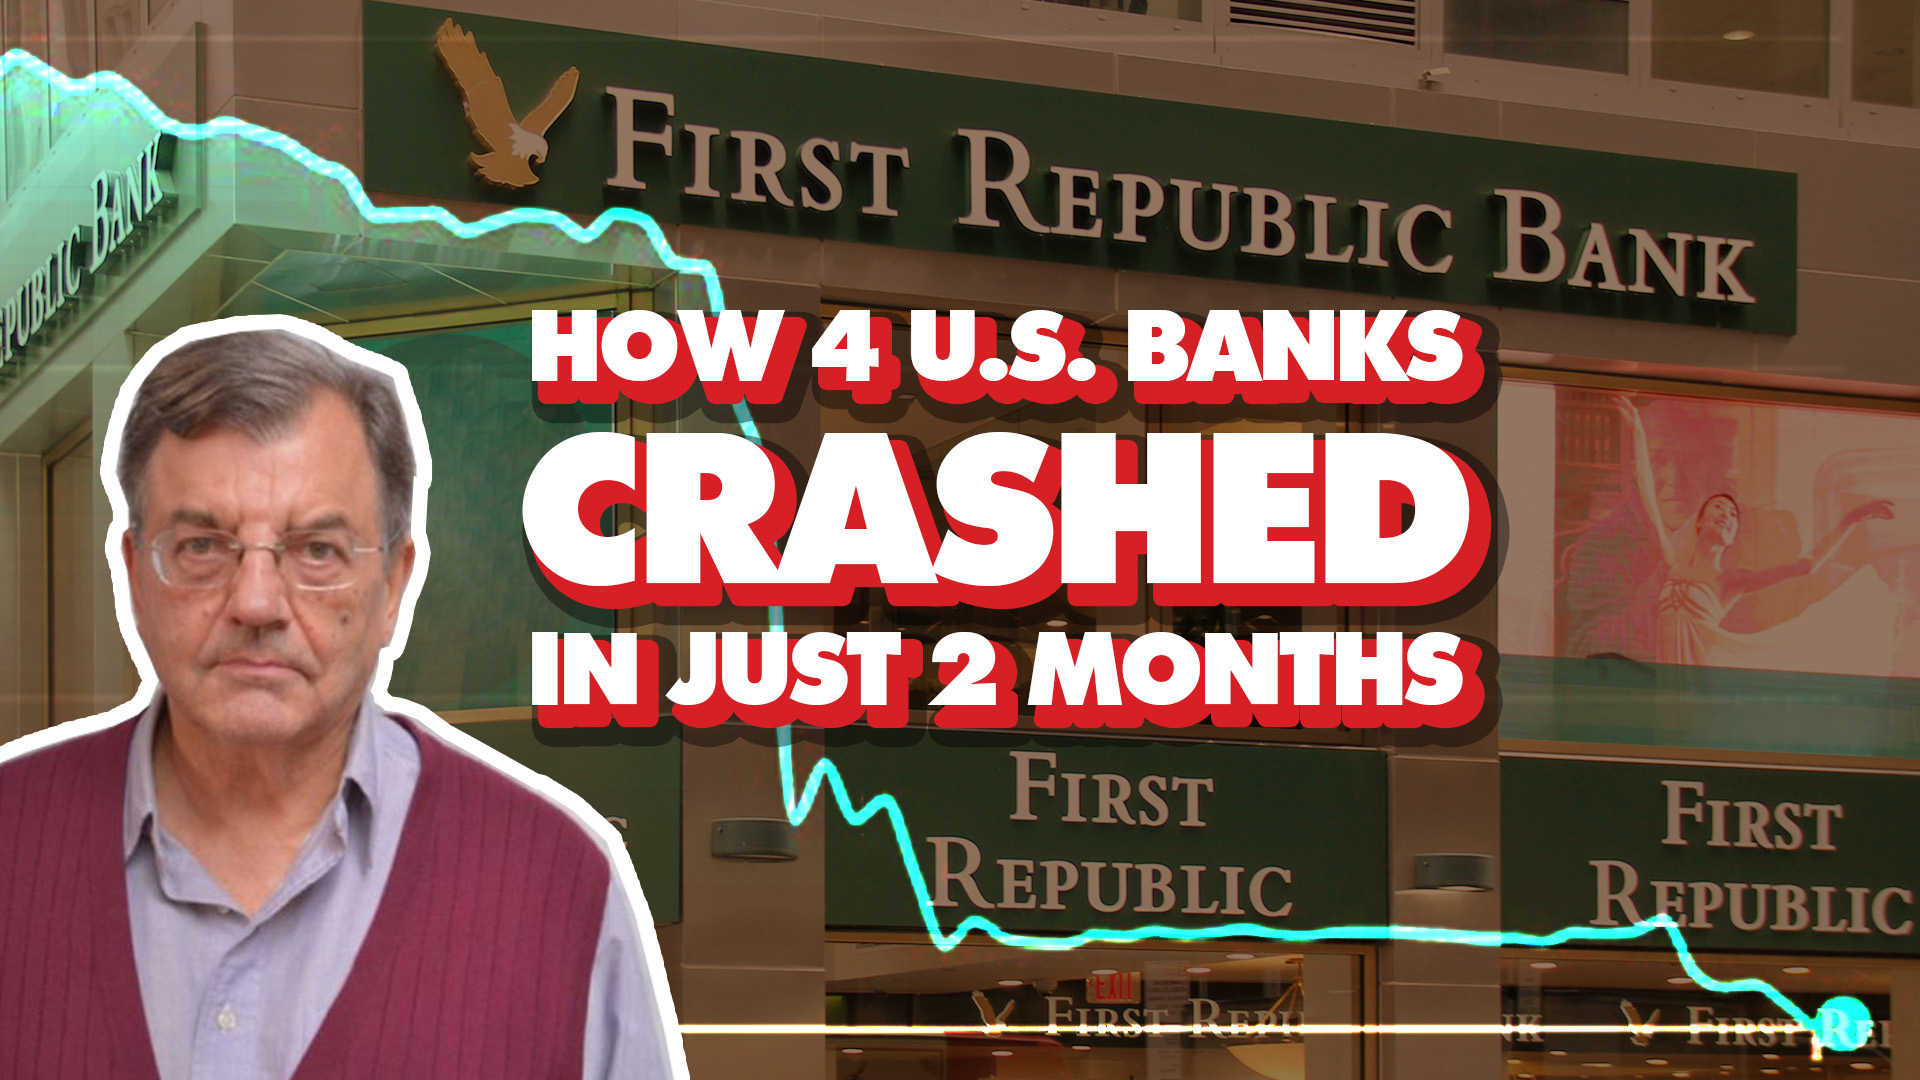 4 US Banks Crash In 2 Months Banking Crisis Explained By Economist